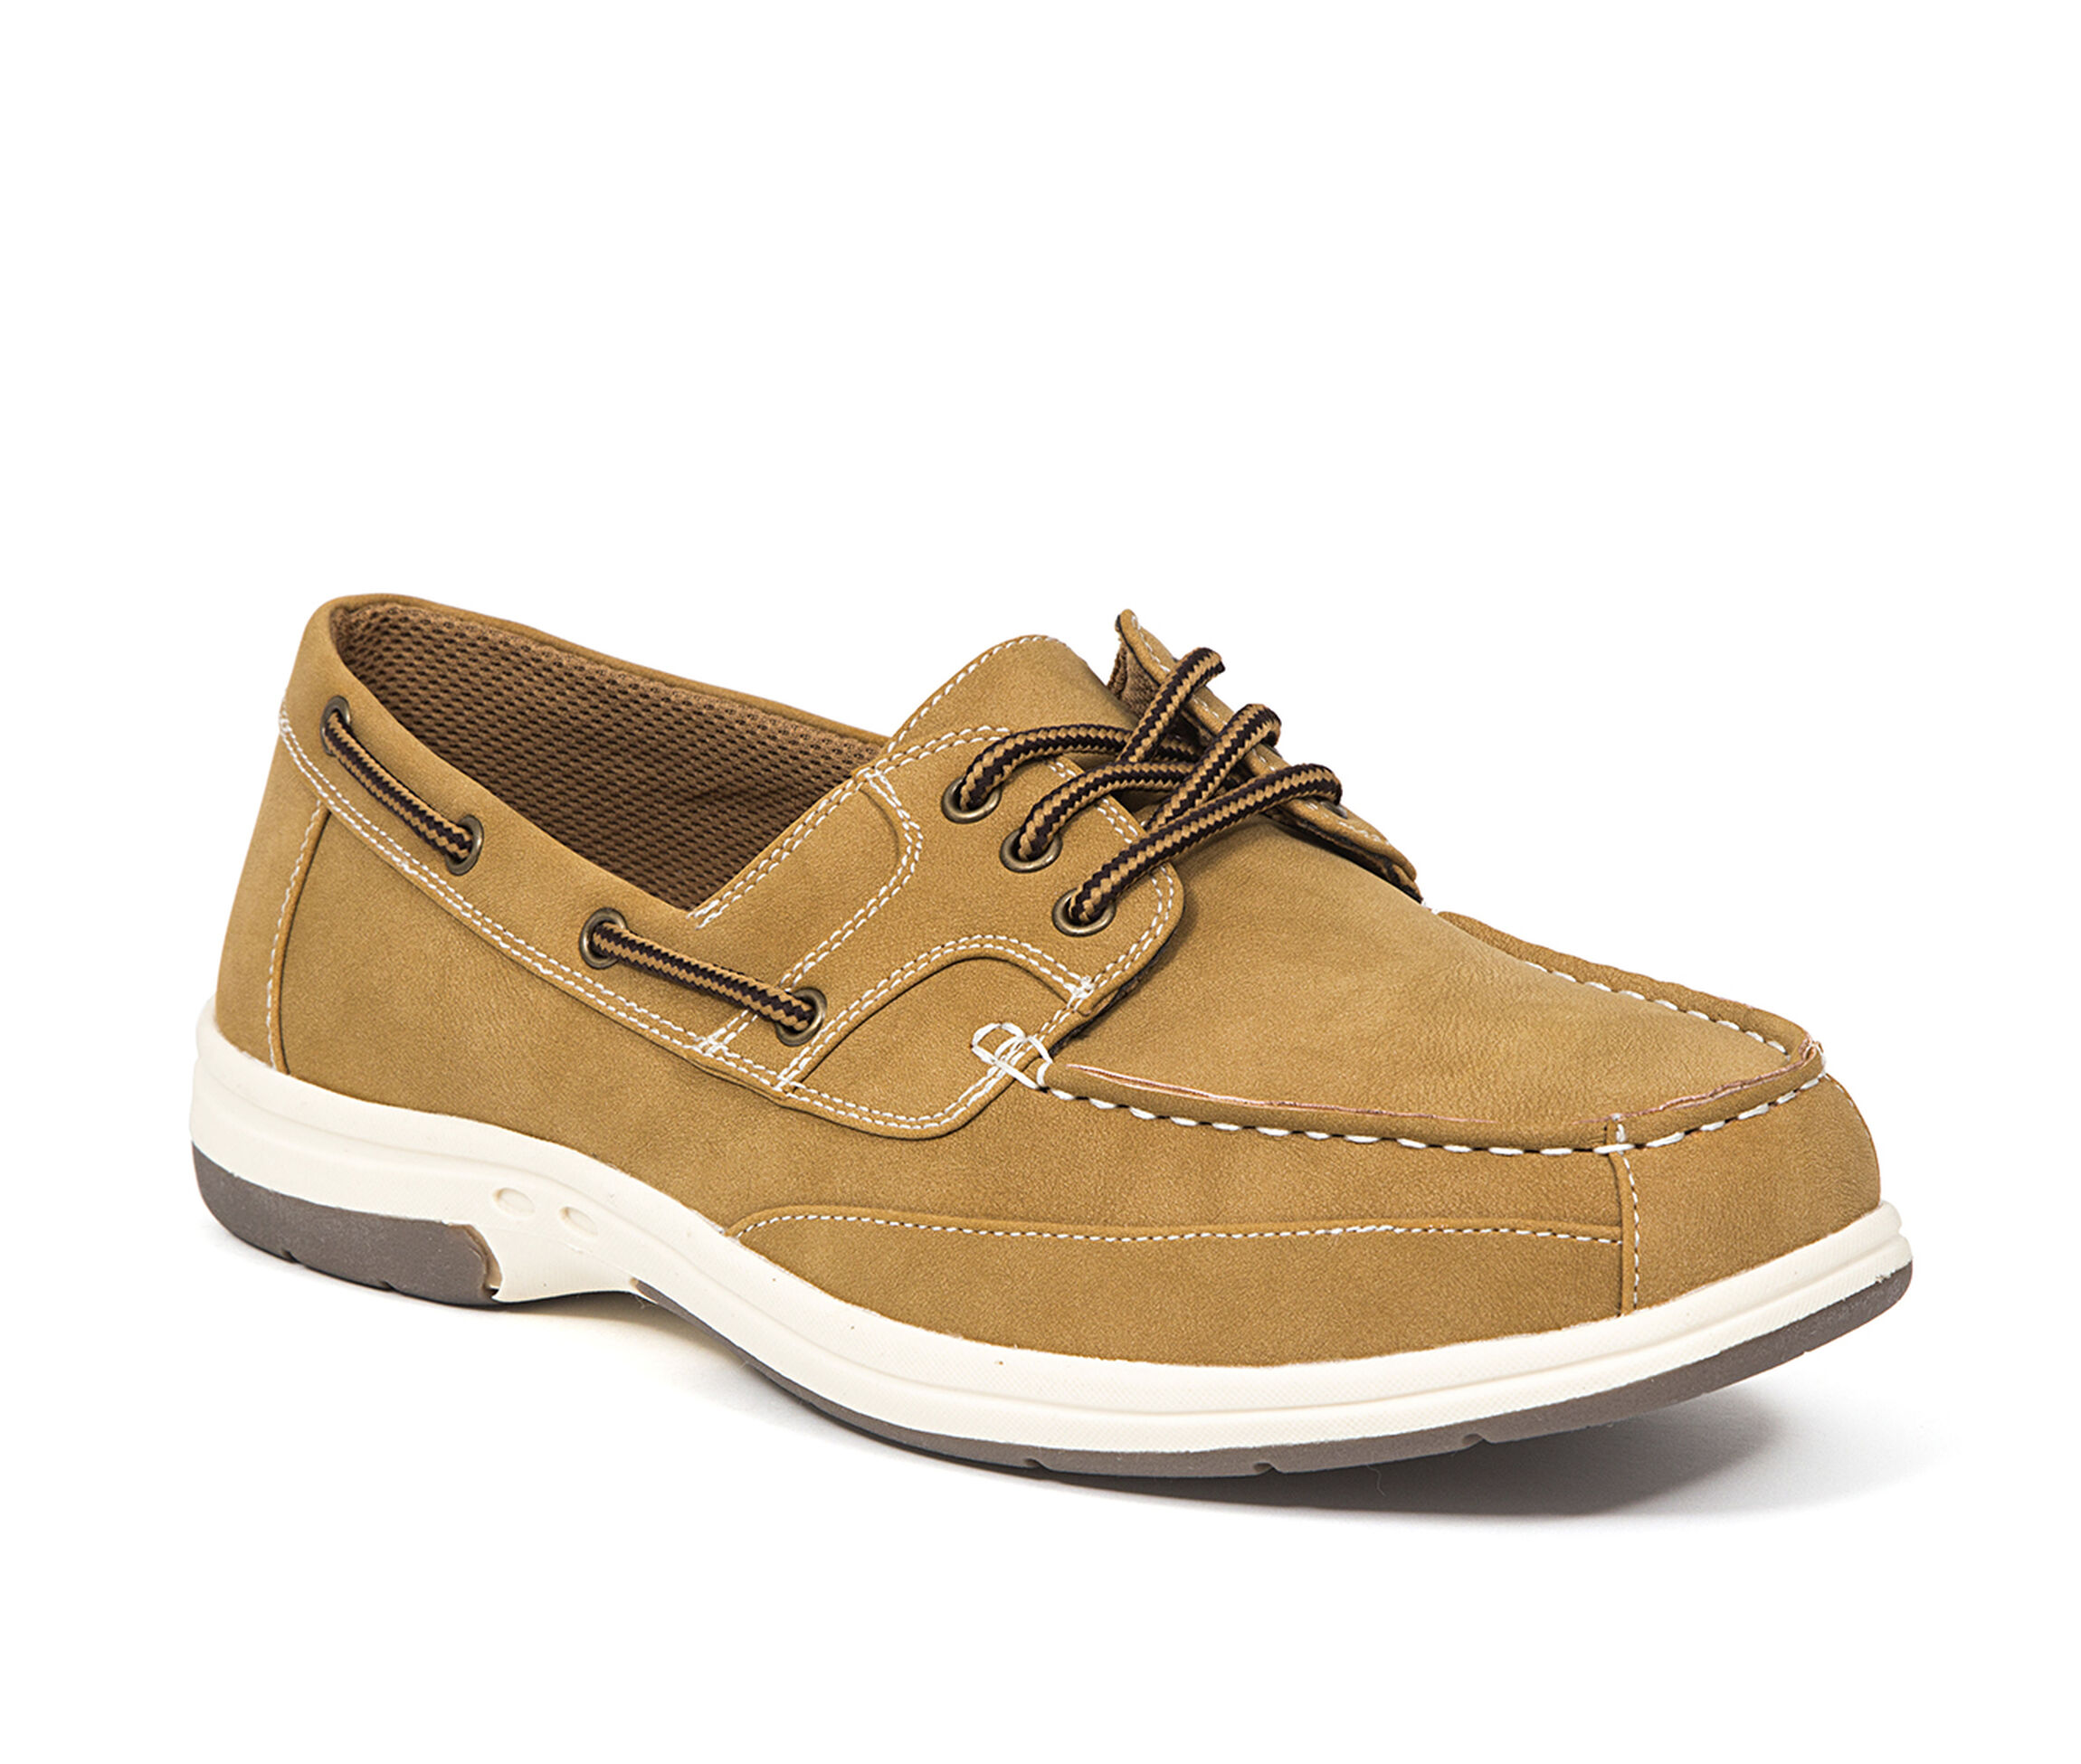 Men's Deer Stags Mitch Boat Shoes in Light Tan Size 9 Medium